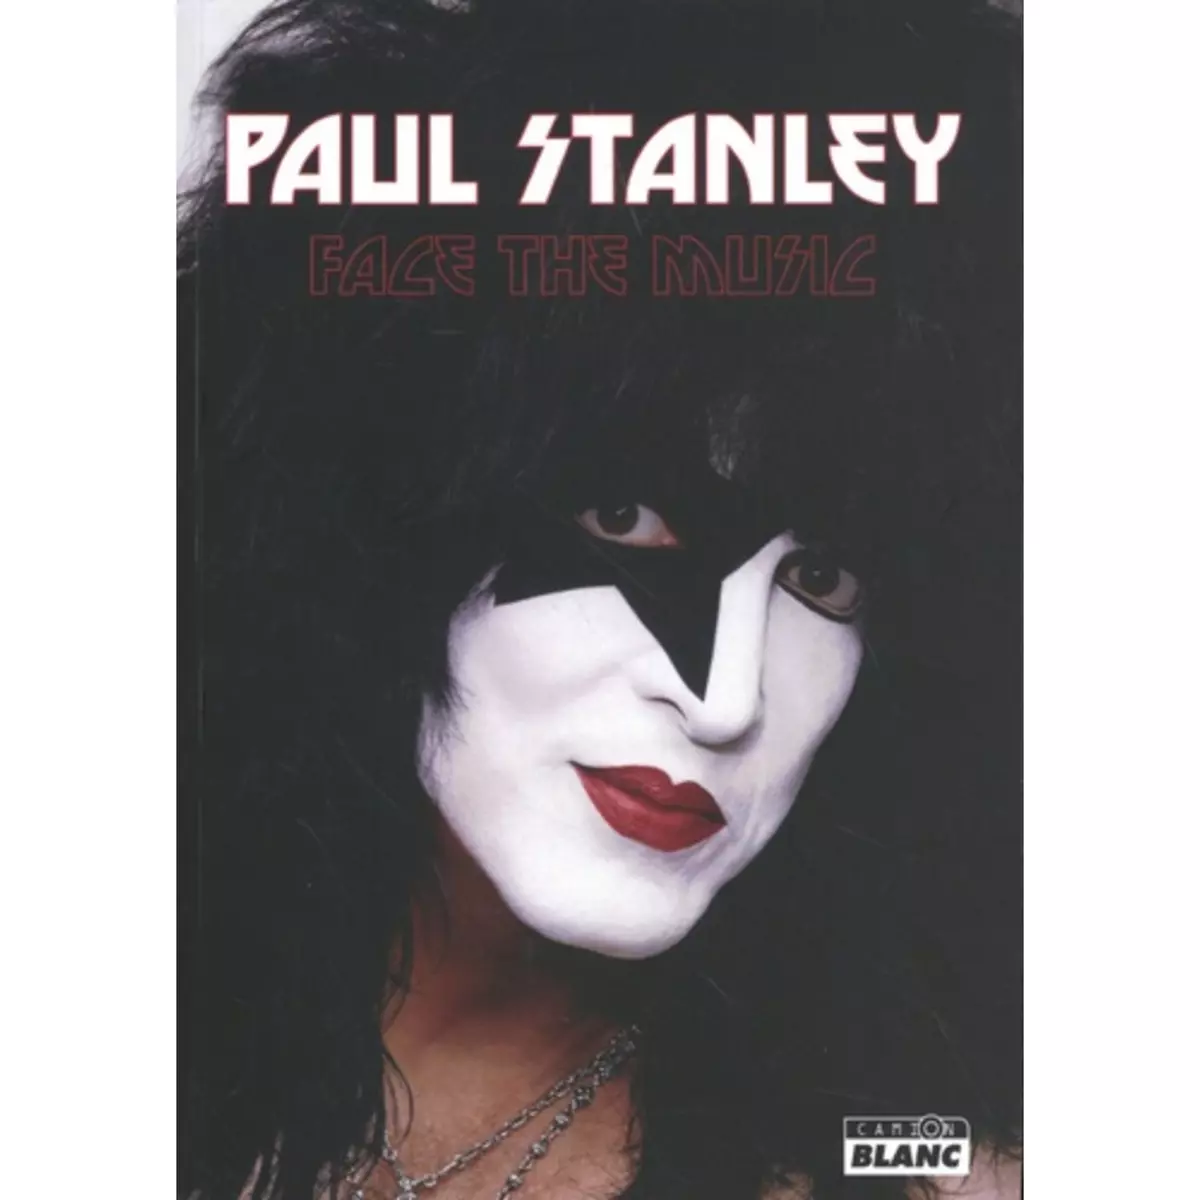  FACE THE MUSIC, Stanley Paul